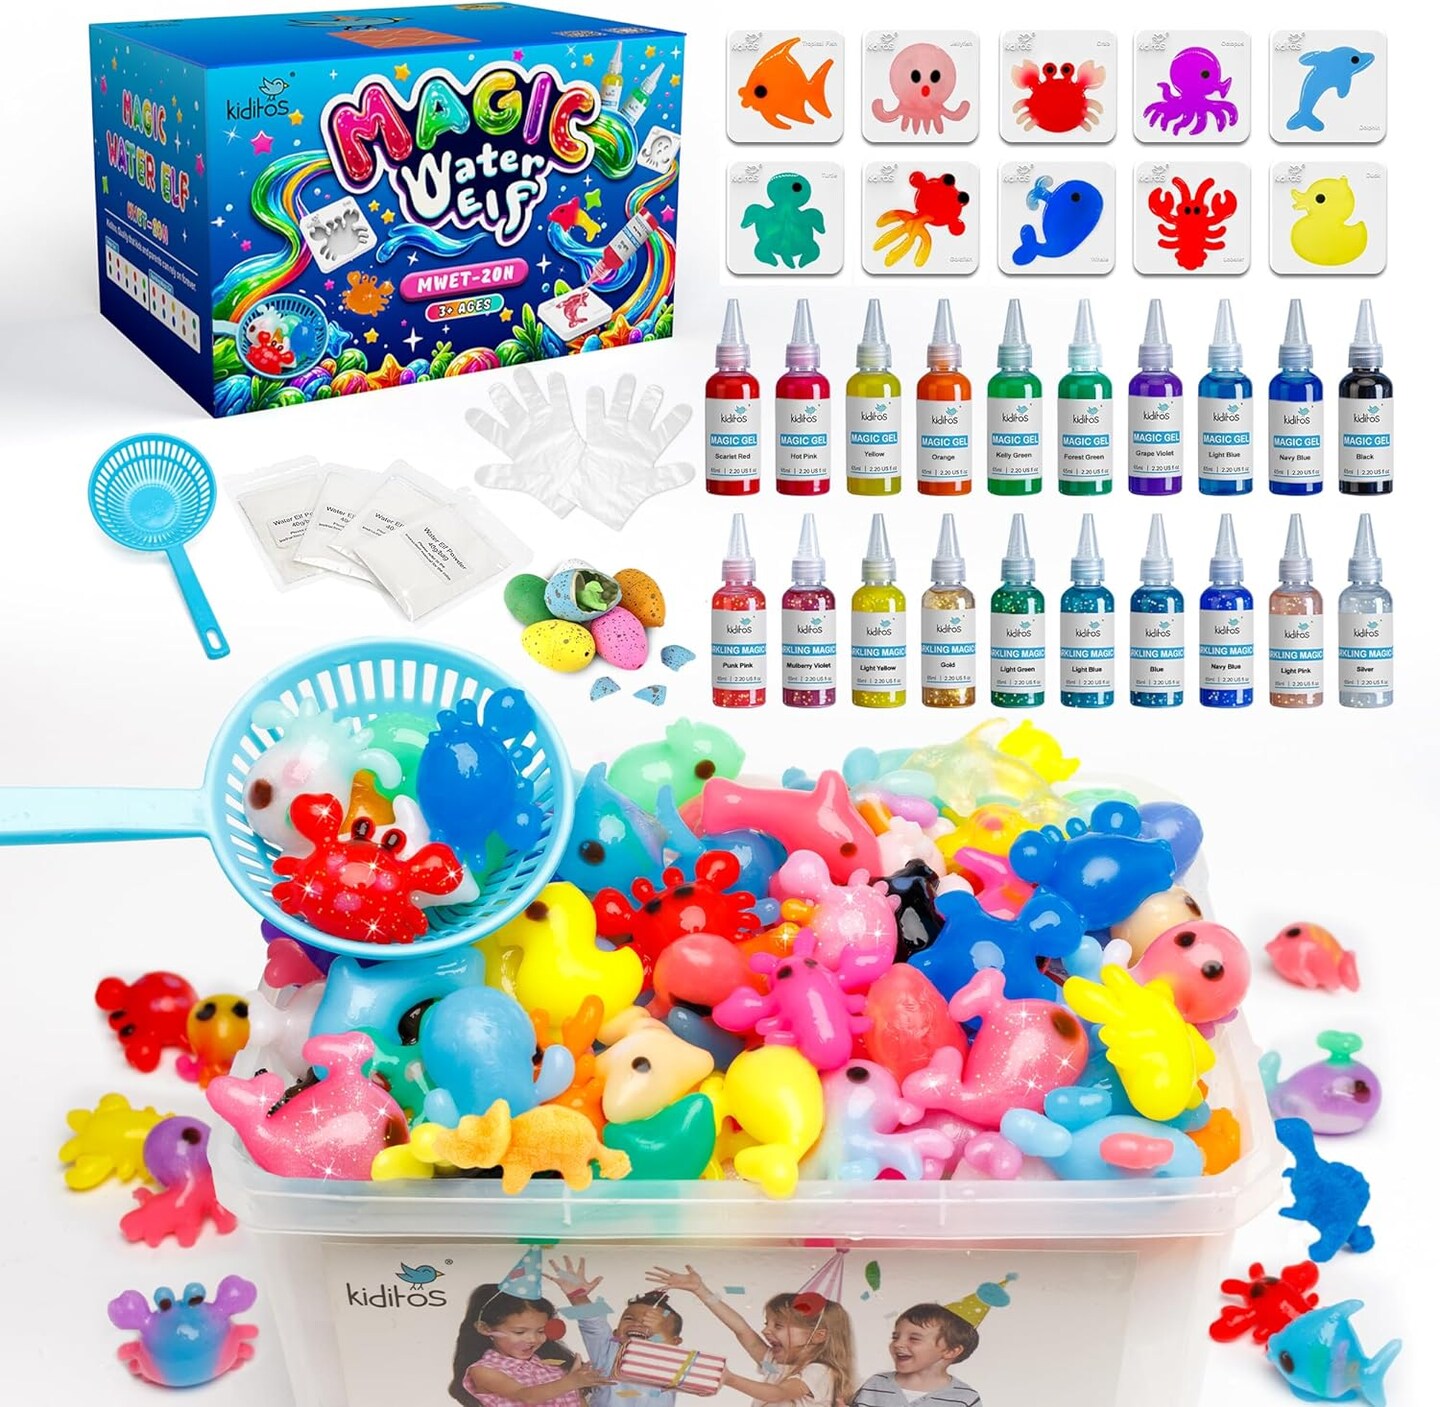 20 Colors New Magic Water Elf Toy Kit, Aqua Fairy Water Gel Kit with 10 Colors Sparkling Magic Gel, 10 Colors Magic Gel, 6 Animal Molds, 6 Dinosaur Egg Toys, and Birthday Gifts Crafts and Art Kit for Kids